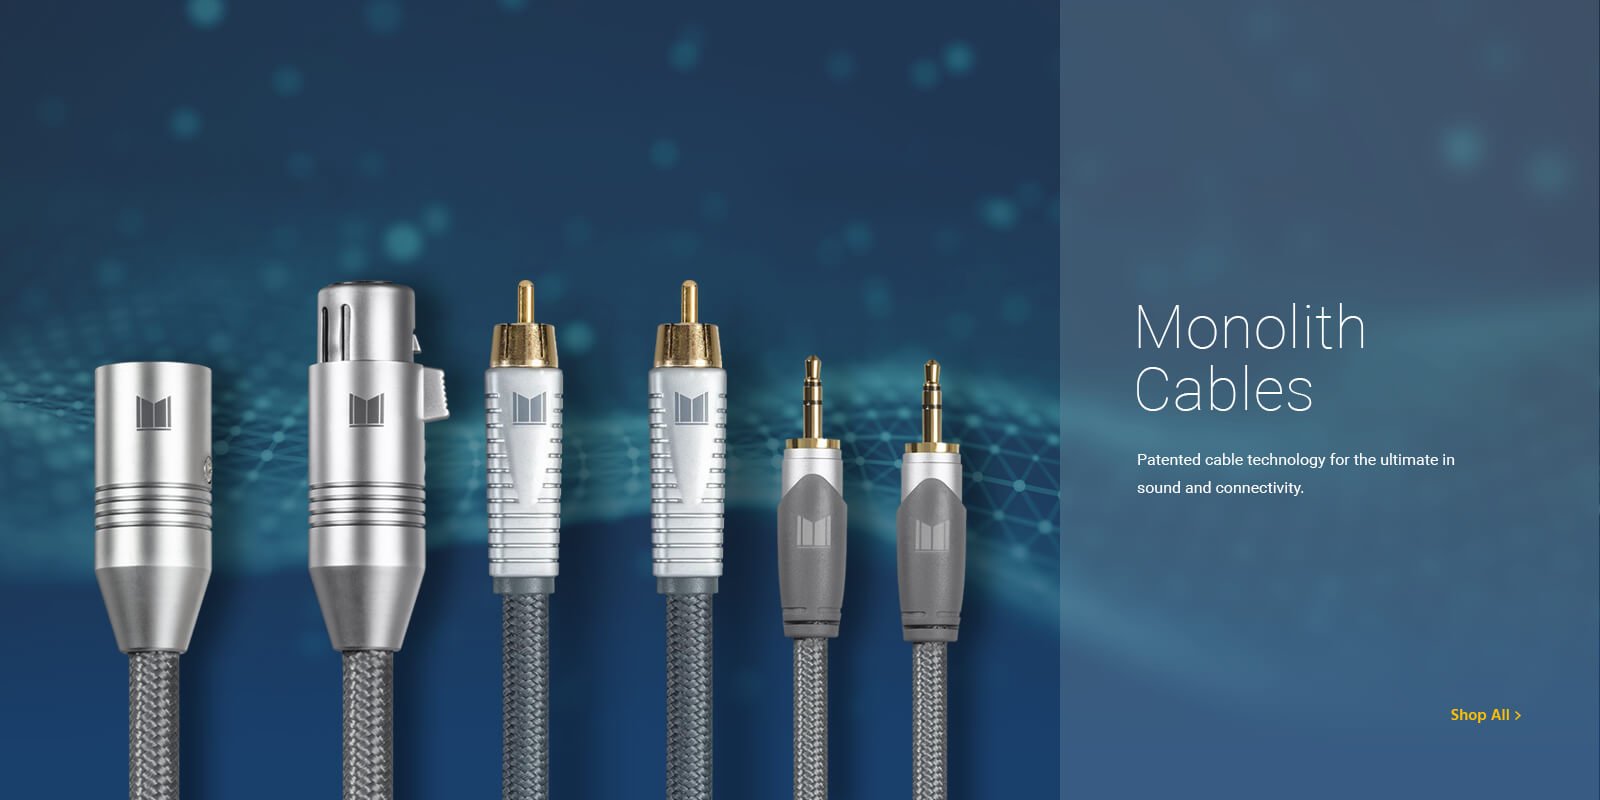 Monolith Cables. Patented cable technology for the ultimate in sound and connectivity. Shop All